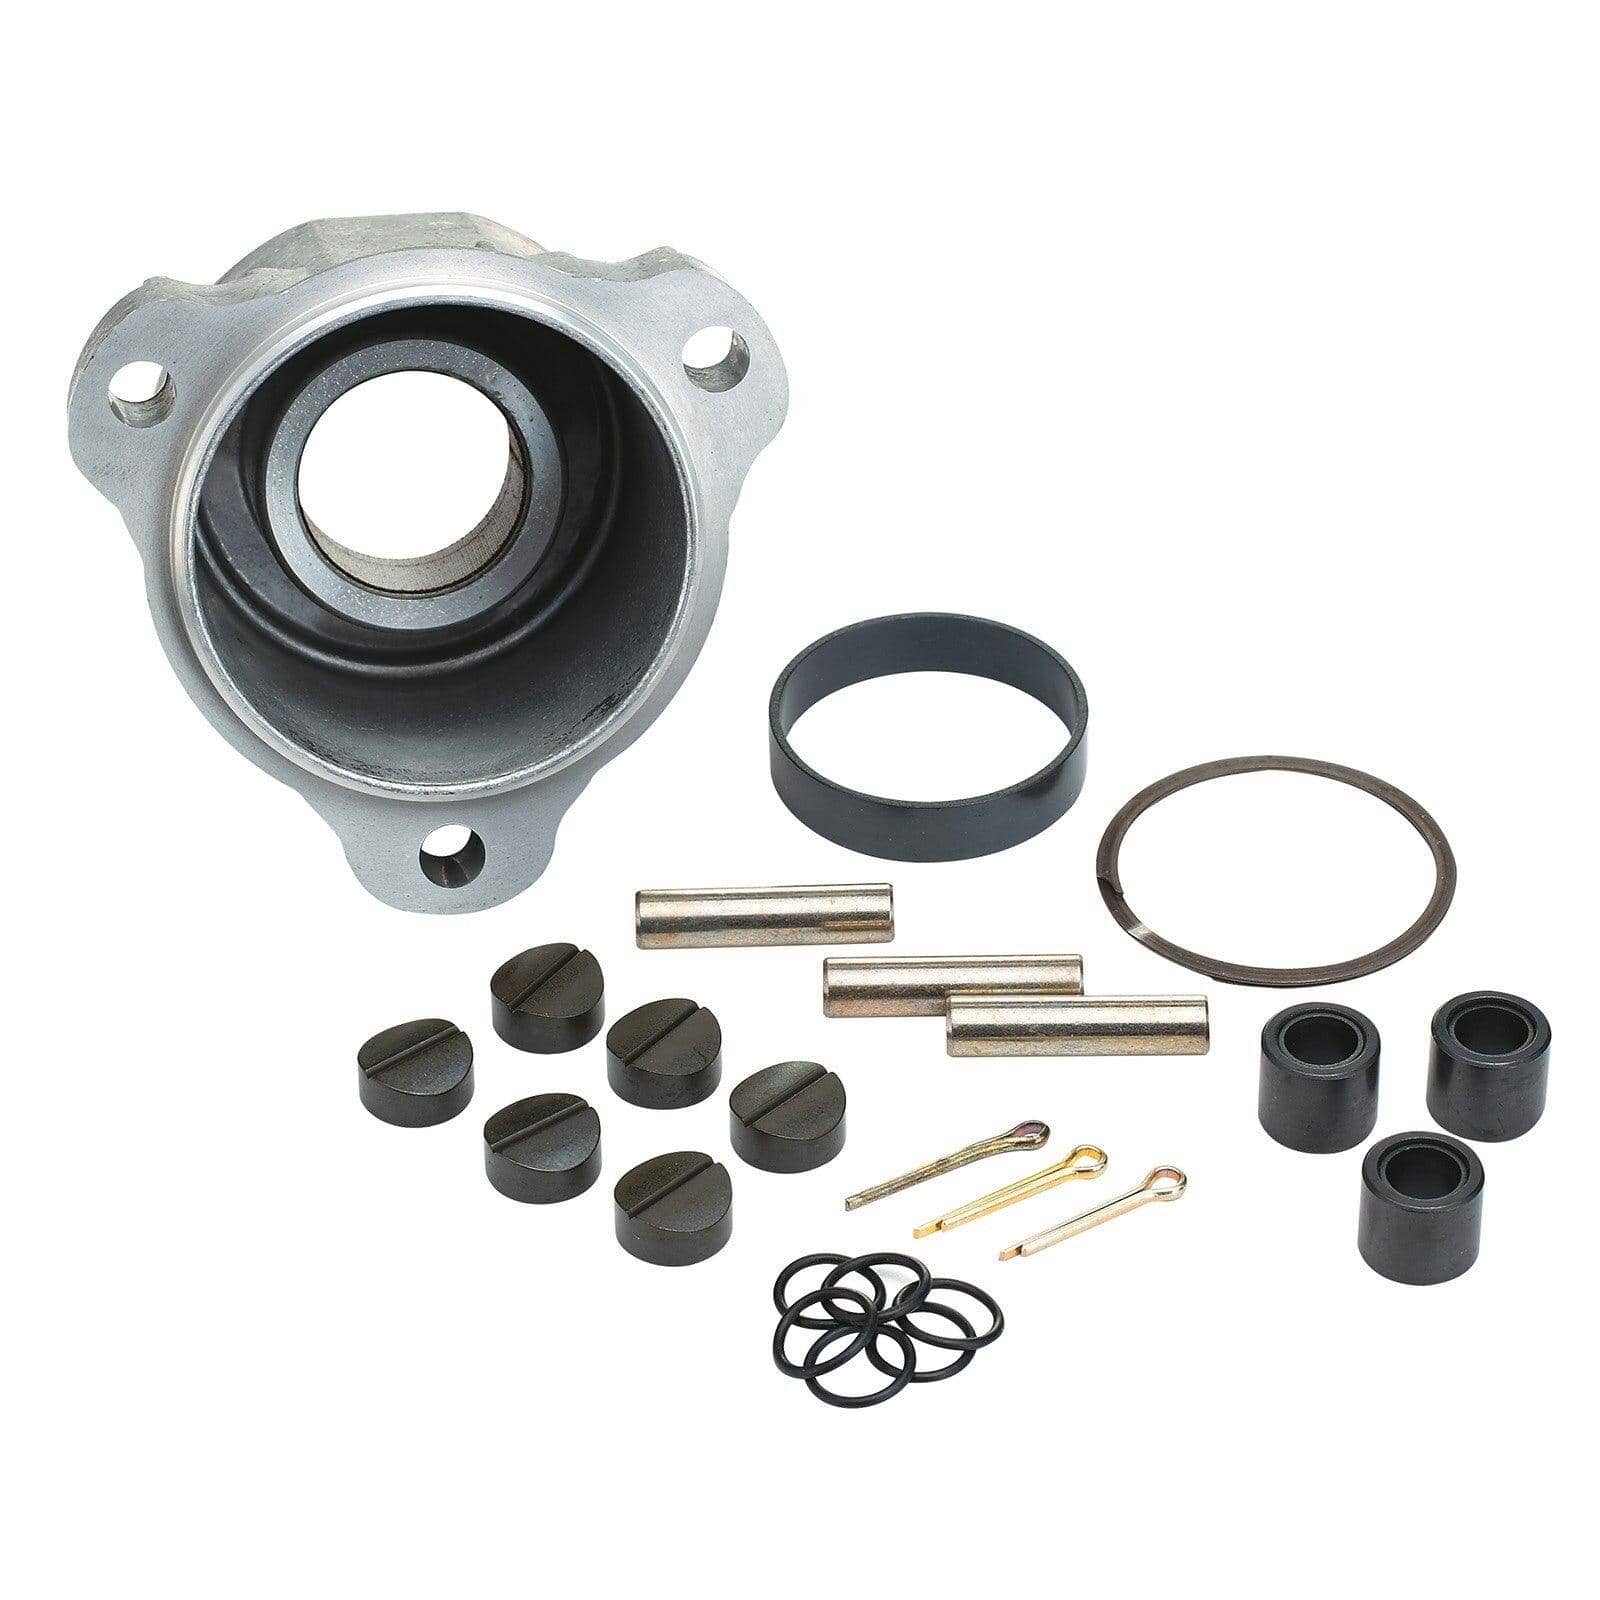 Maintenance Kit for TRA Drive Pulley - 2011 and prior (1200), 2011 and prior (600 E-TEC high altitude)